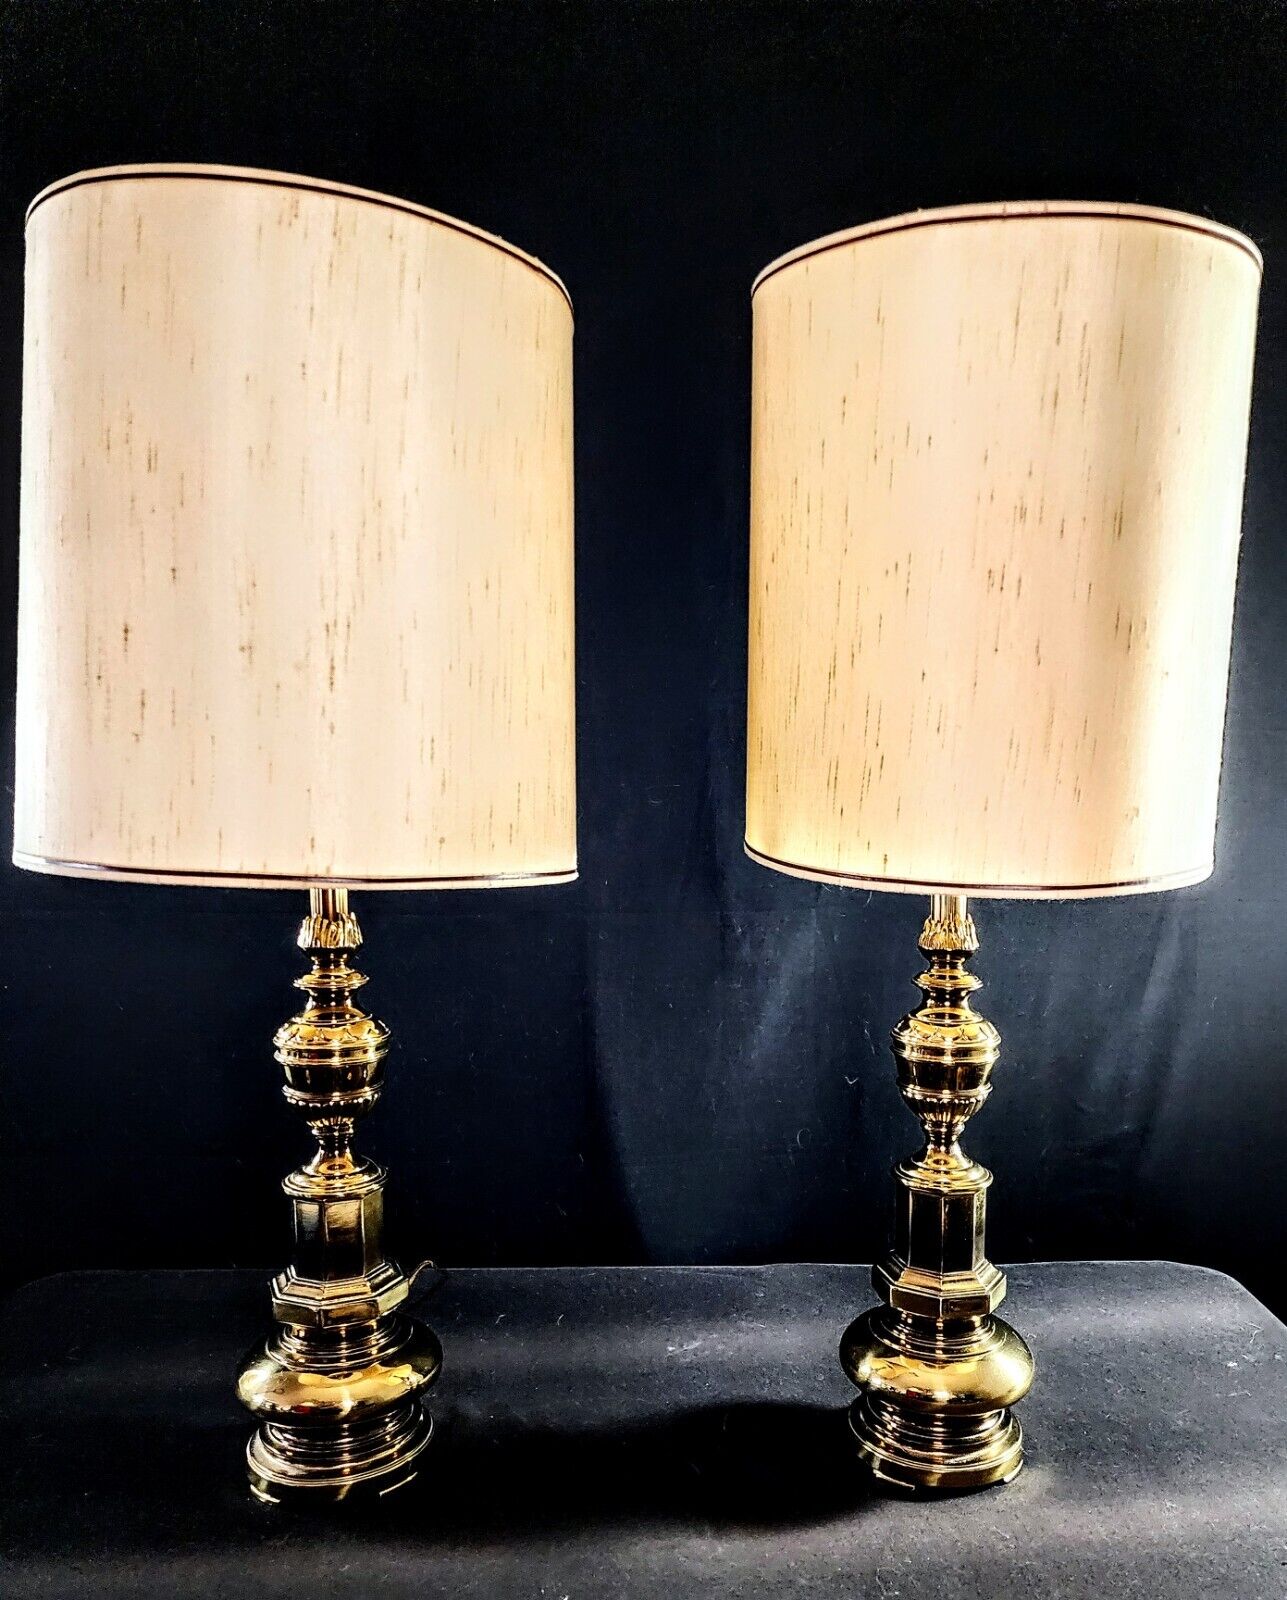 Pair of Stiffel Solid Brass Table Lamps With ORIGINAL SHADES